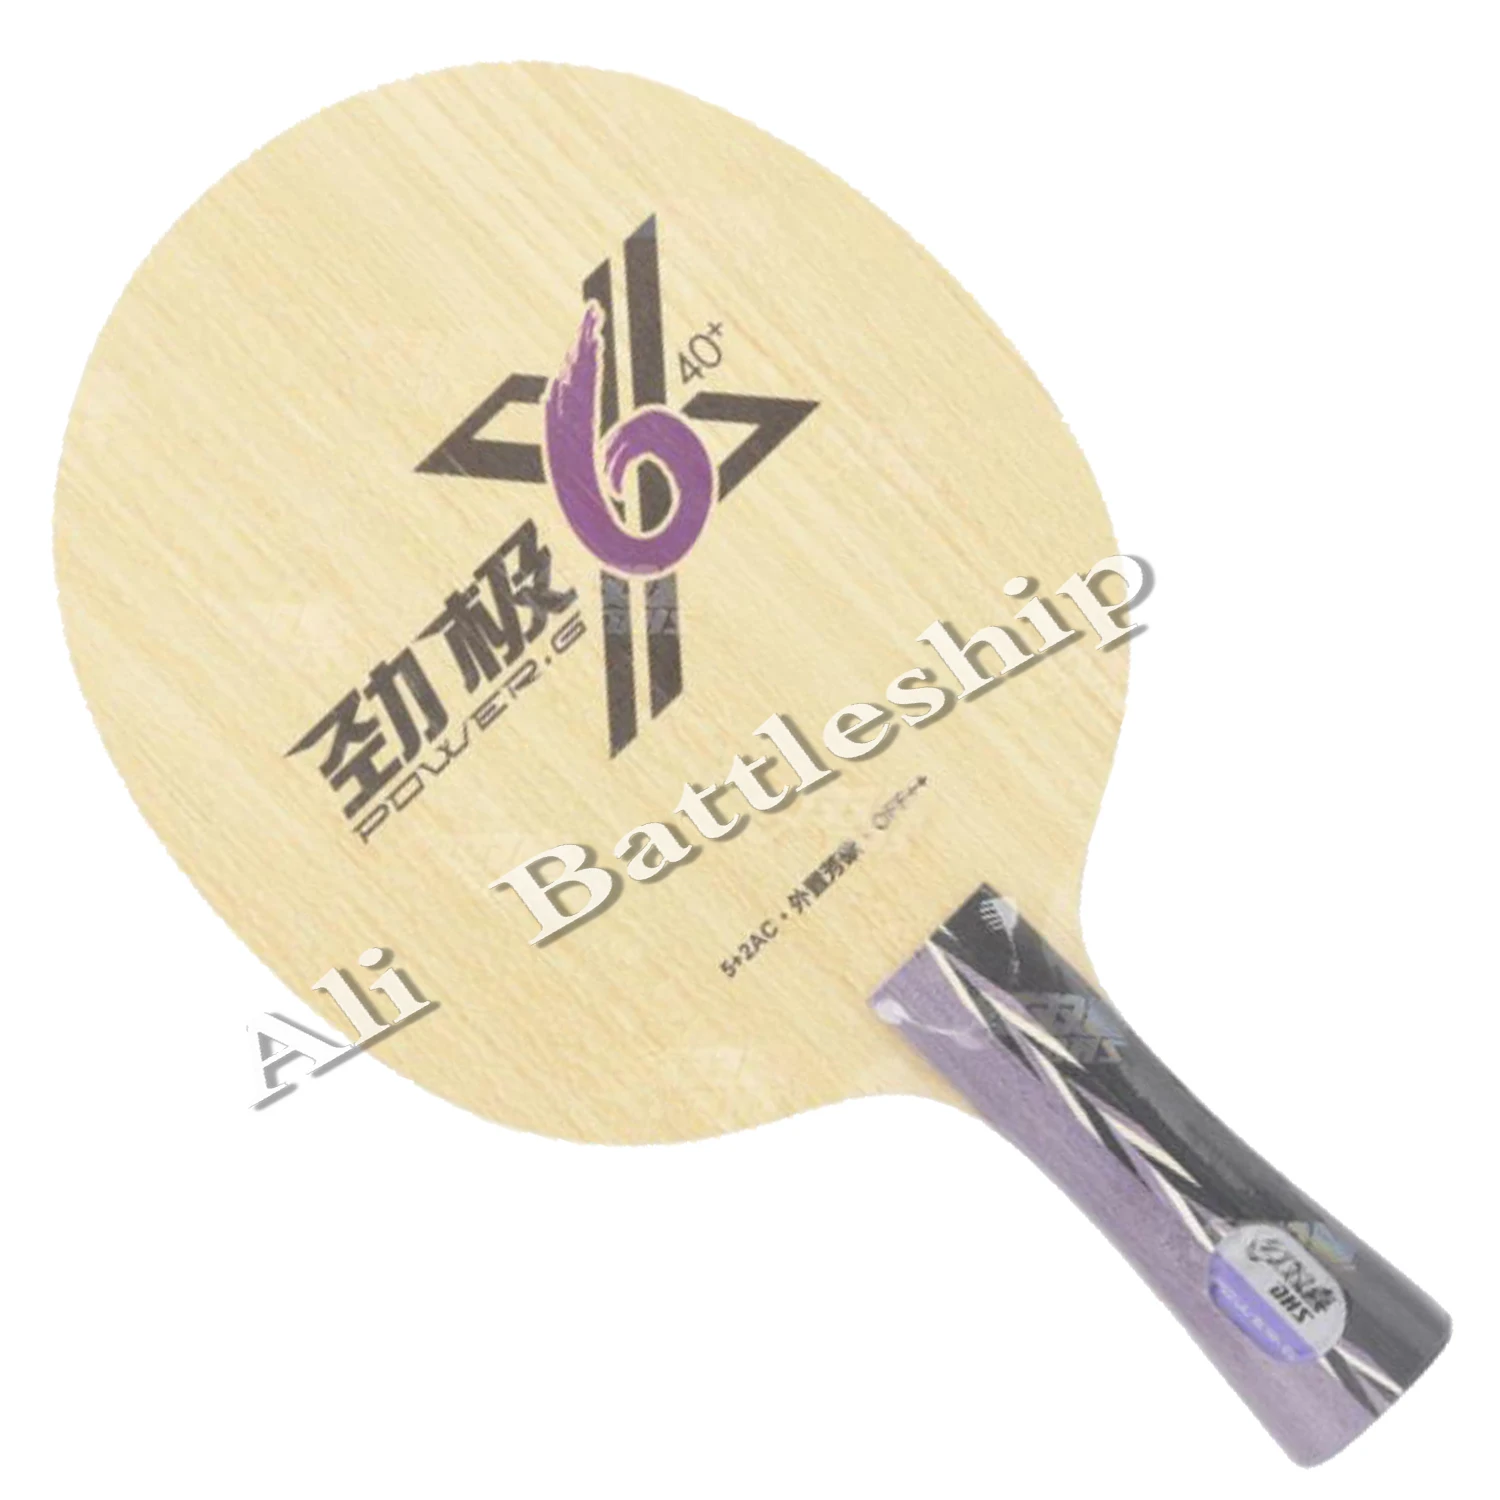 DHS POWER PG6X New 5+2AC Arylate Carbon Original DHS Table Tennis Blade Ping Pong Racket Bat Paddle